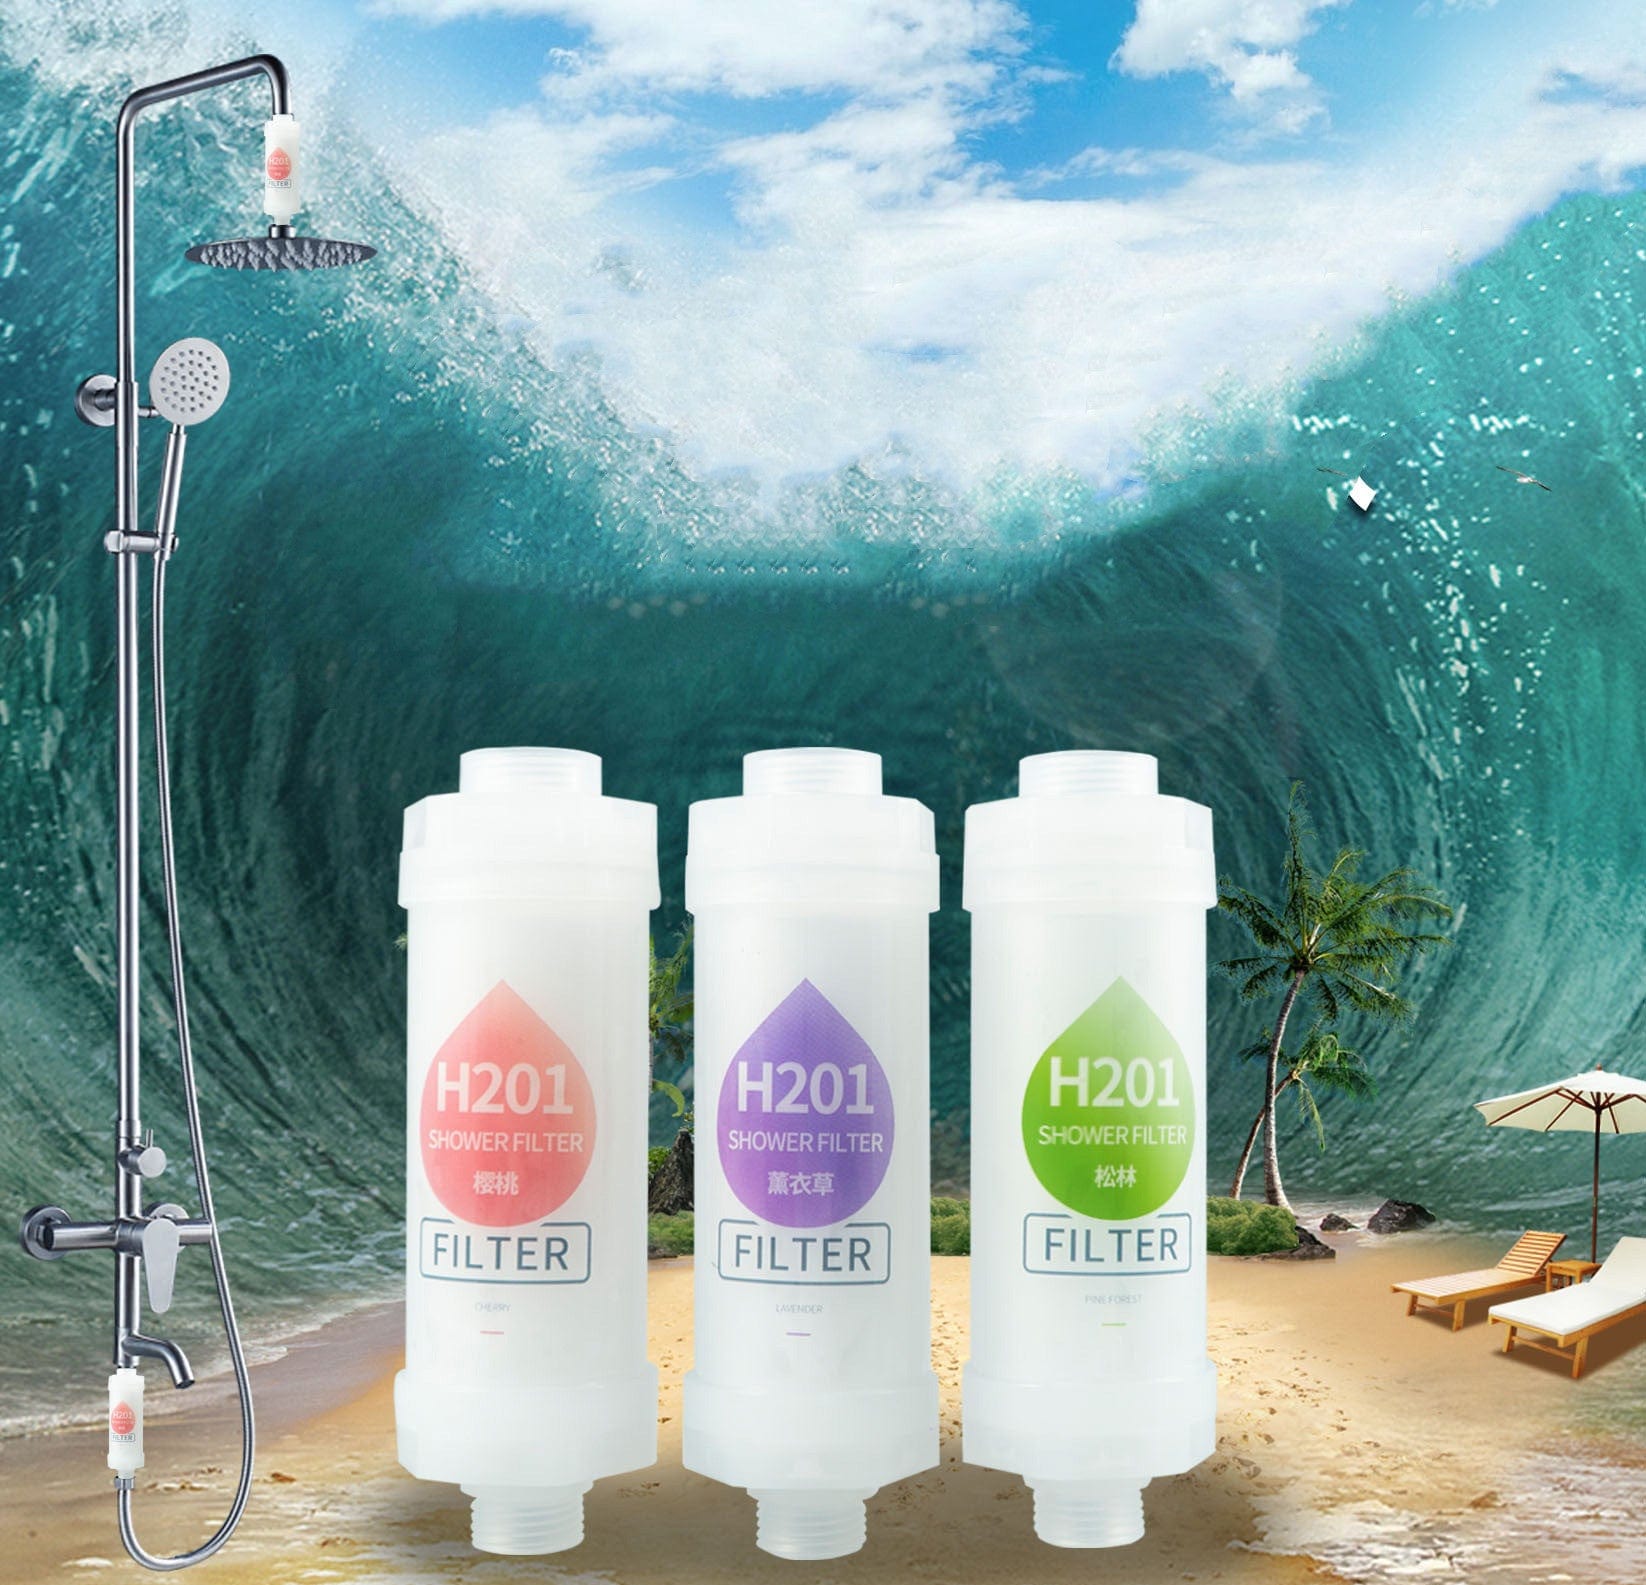 Vitamin C Scented Shower Filter Home SPA Chlorine Removal Filter Balm - MolaixShower and Laundry Water Purifiers